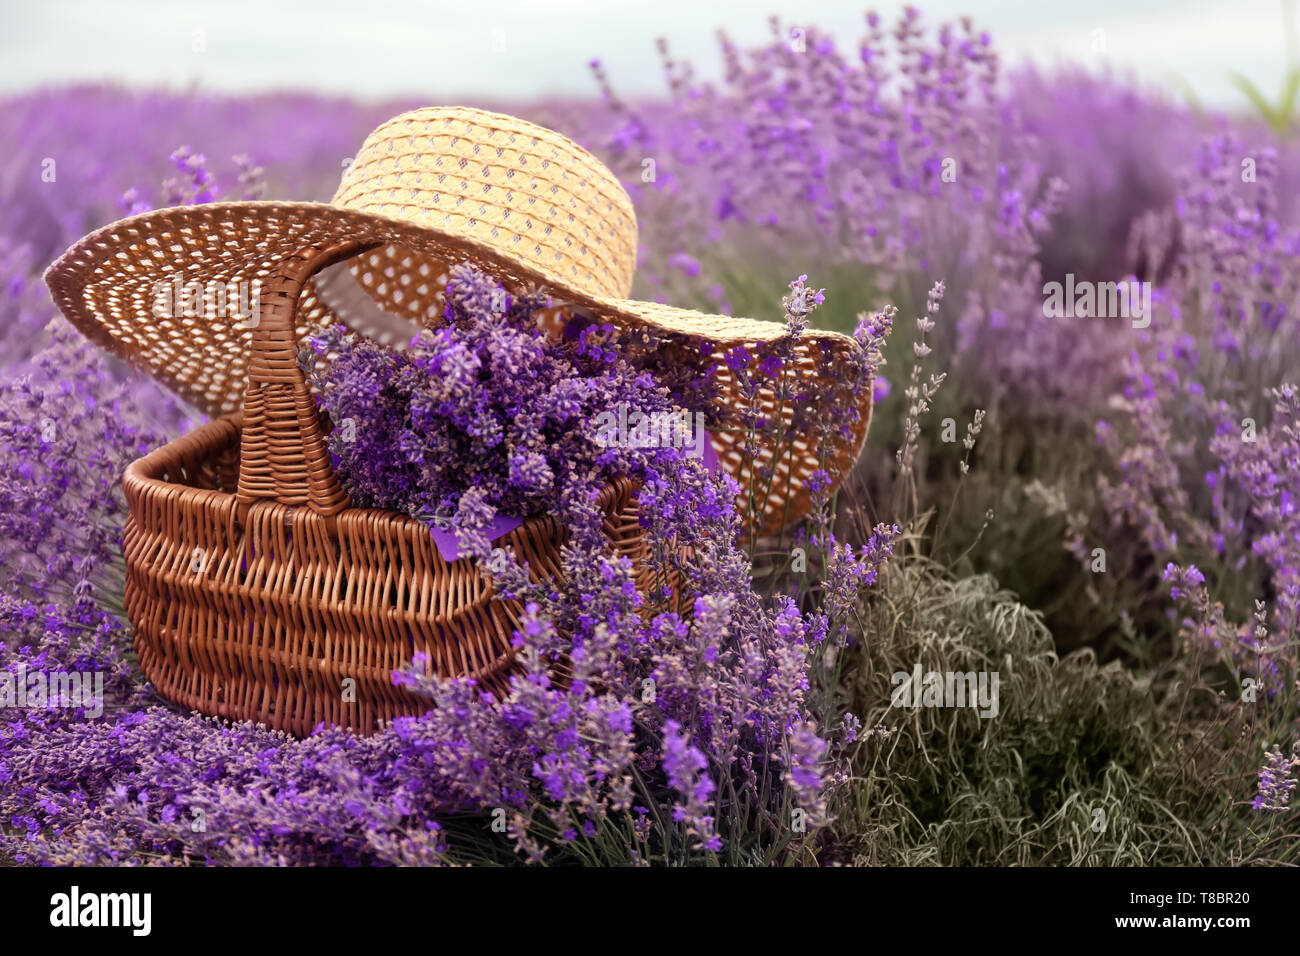 Cut Dry Lavender Flowers In A Small Wicker Basket In The Garden Next To  Blooming Lavender Bushes And Summer Hat. Stock Photo, Picture and Royalty  Free Image. Image 188853135.